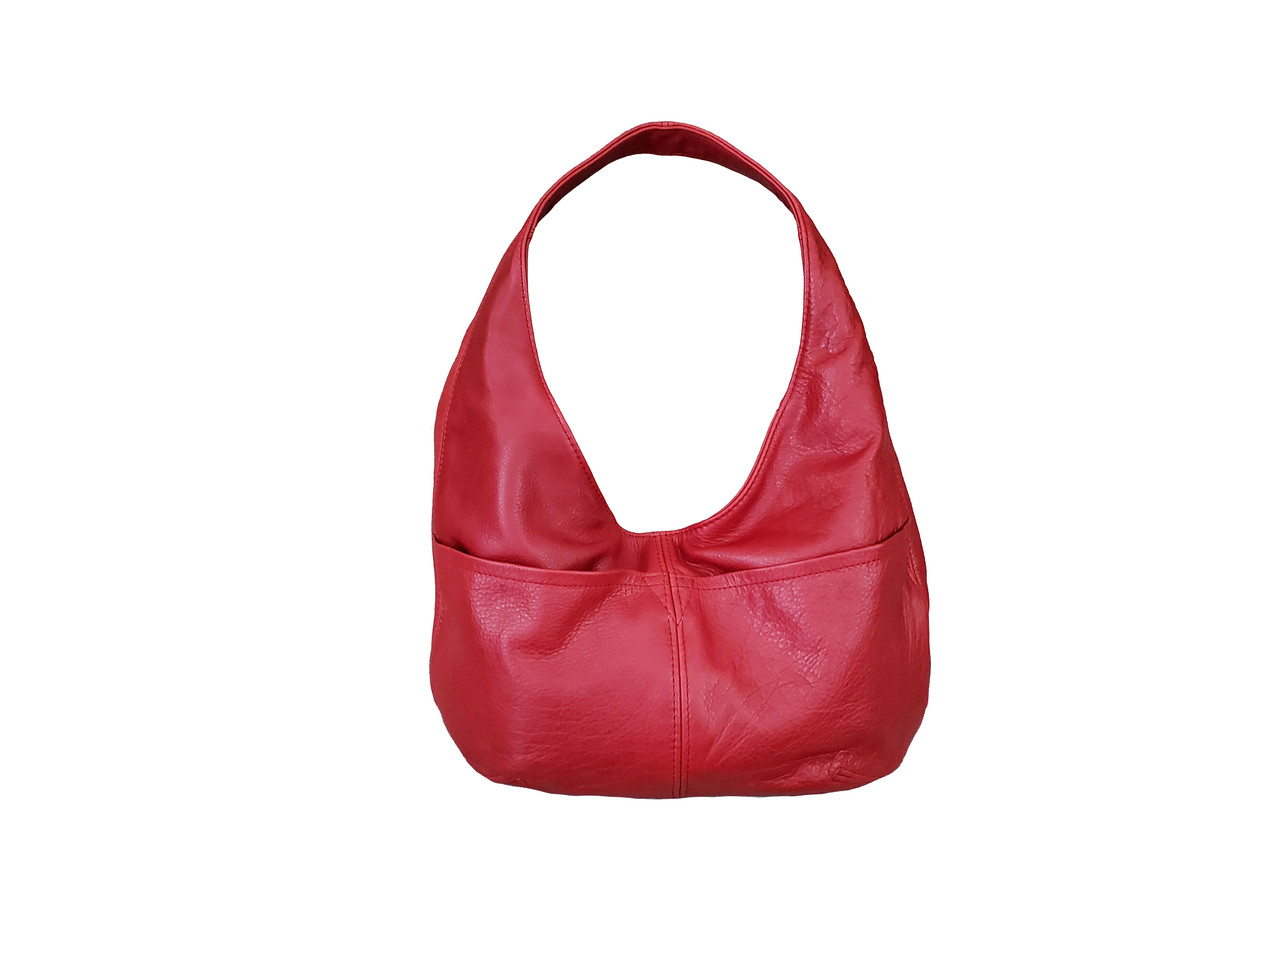 Lavie Red Hobo Bags - Get Best Price from Manufacturers & Suppliers in India